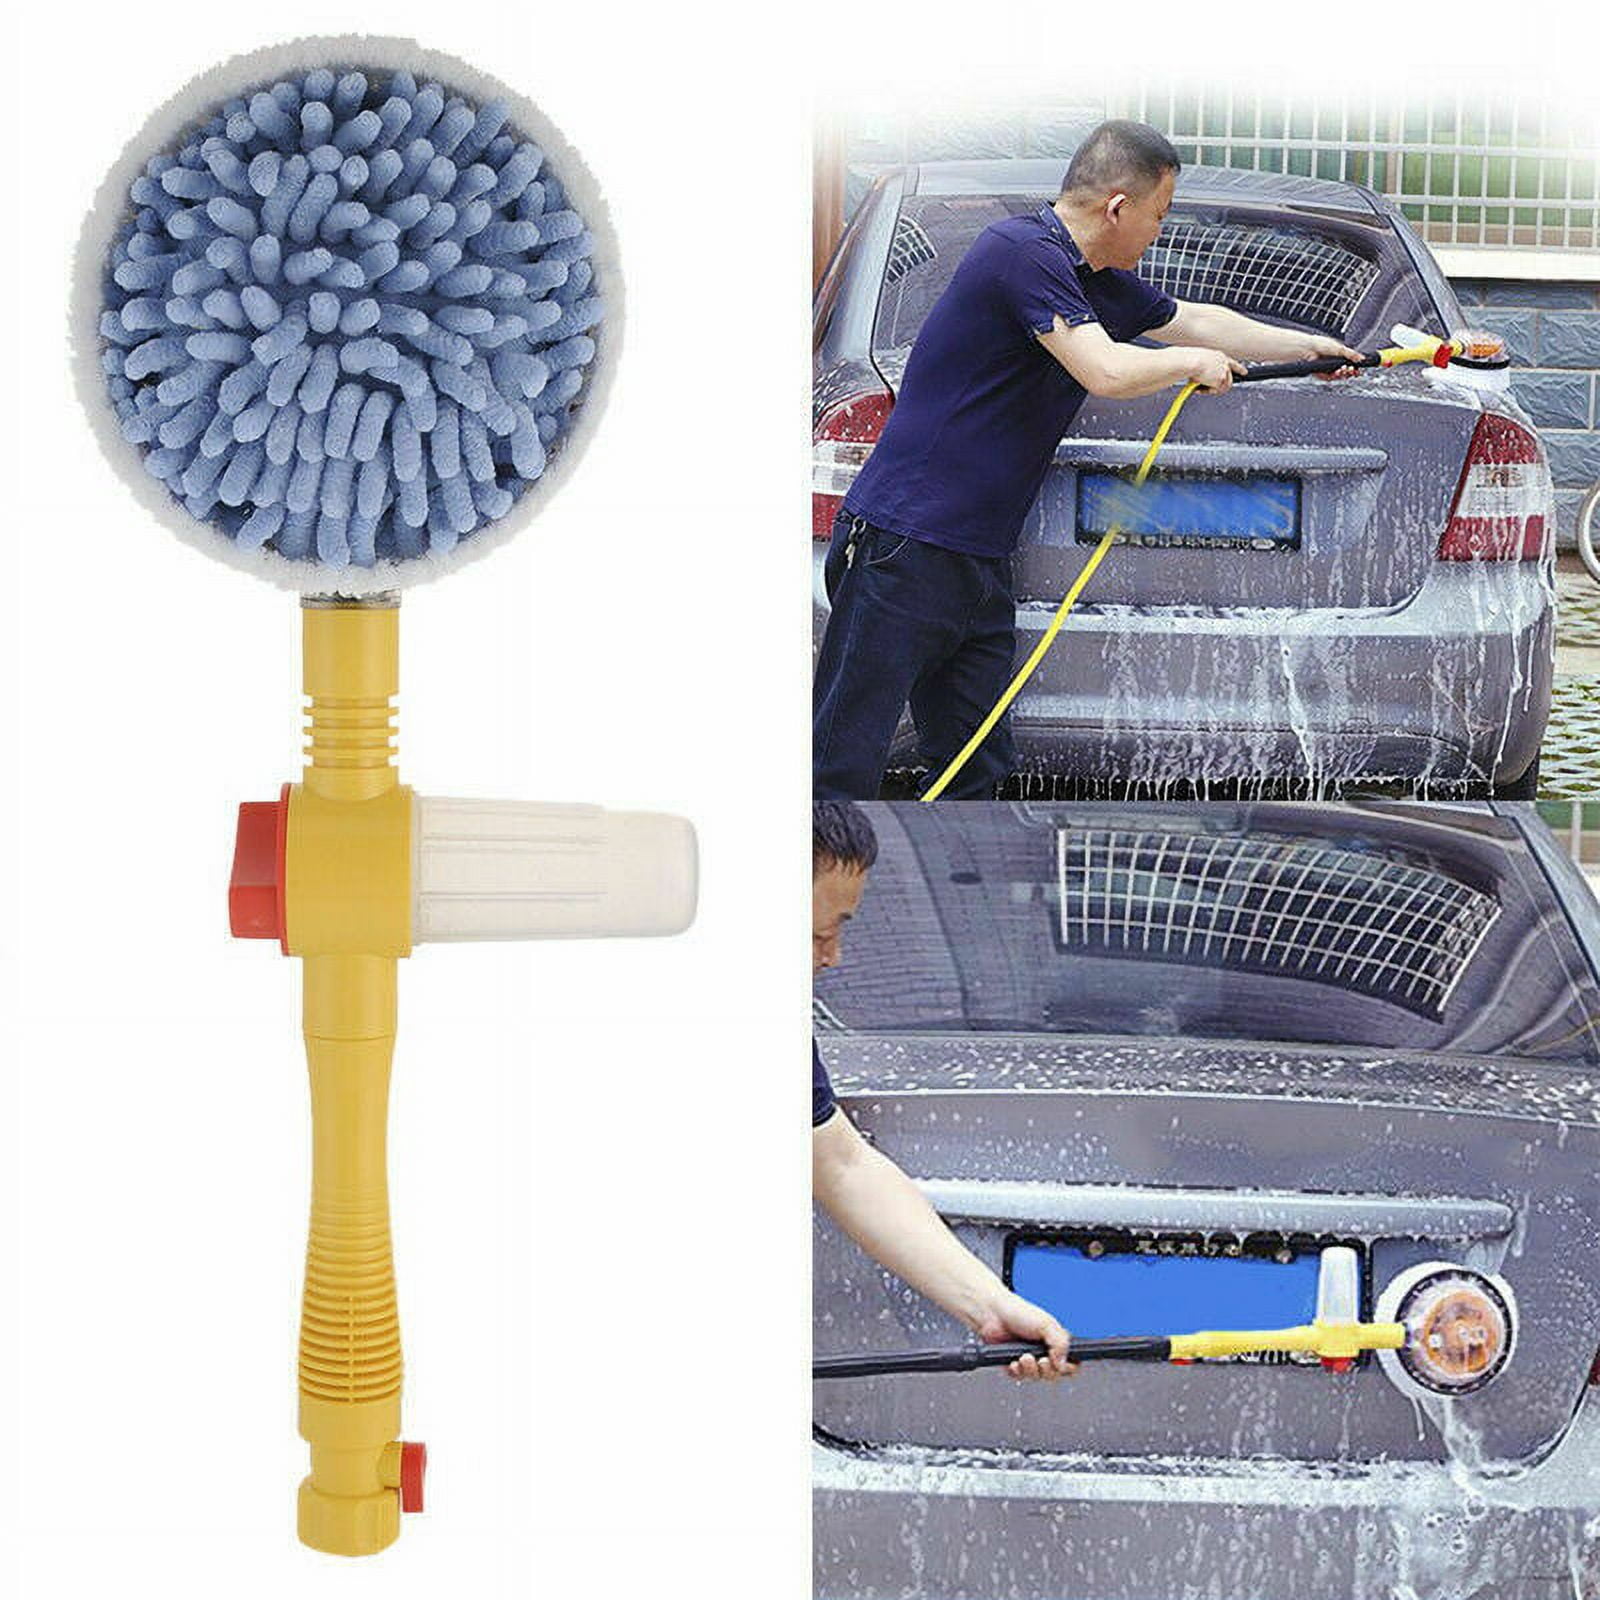 YILAIRIOU Car Wash Kit with Foam Gun - Car Wash Cleaning Kit with Wash  Microfiber Sponge and Towels Tire Brush Collapsible Bucket Wash, Sprayers  for